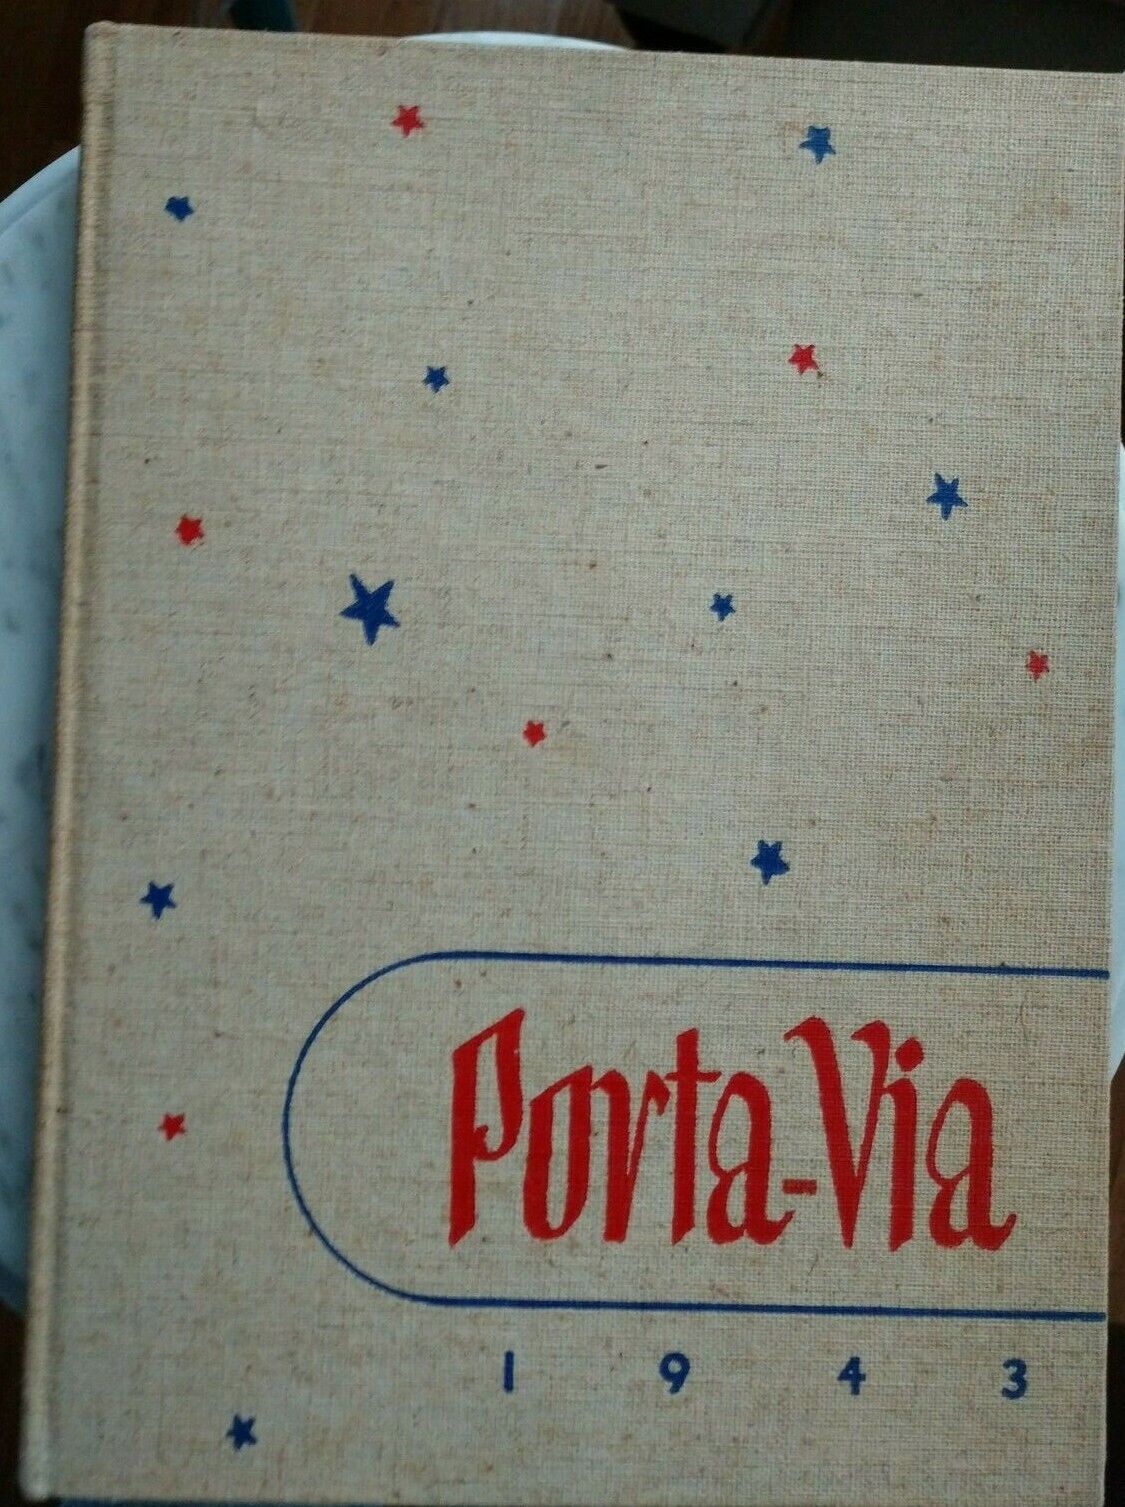 1943 Westfield NY Academy and High School Yearbook - PORTA-VIA / WWII Themes